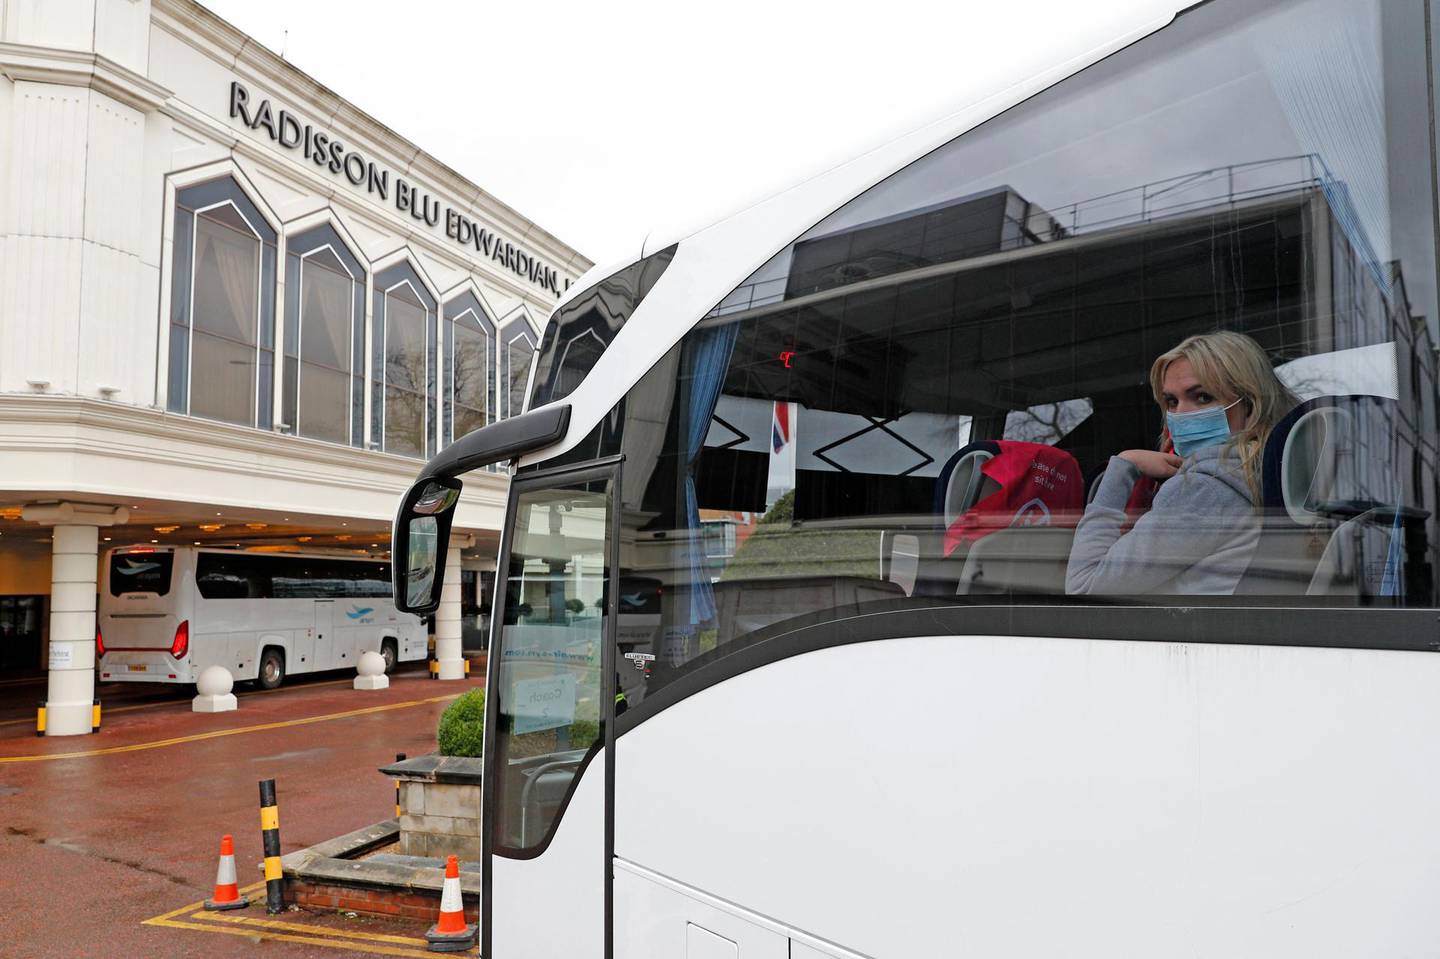 A woman arrives in a coach at the Radisson Blu hotel, where travellers are spending their mandatory hotel quarantine, at Heathrow Airport in west London on February 16, 2021. The mandatory hotel quarantine policy, which began on February 15, 2021, requires all UK citizens and permanent residents returning from 33 countries on its so-called travel ban list to self-isolate in a government approved facility for 10 days. 


 / AFP / Adrian DENNIS
